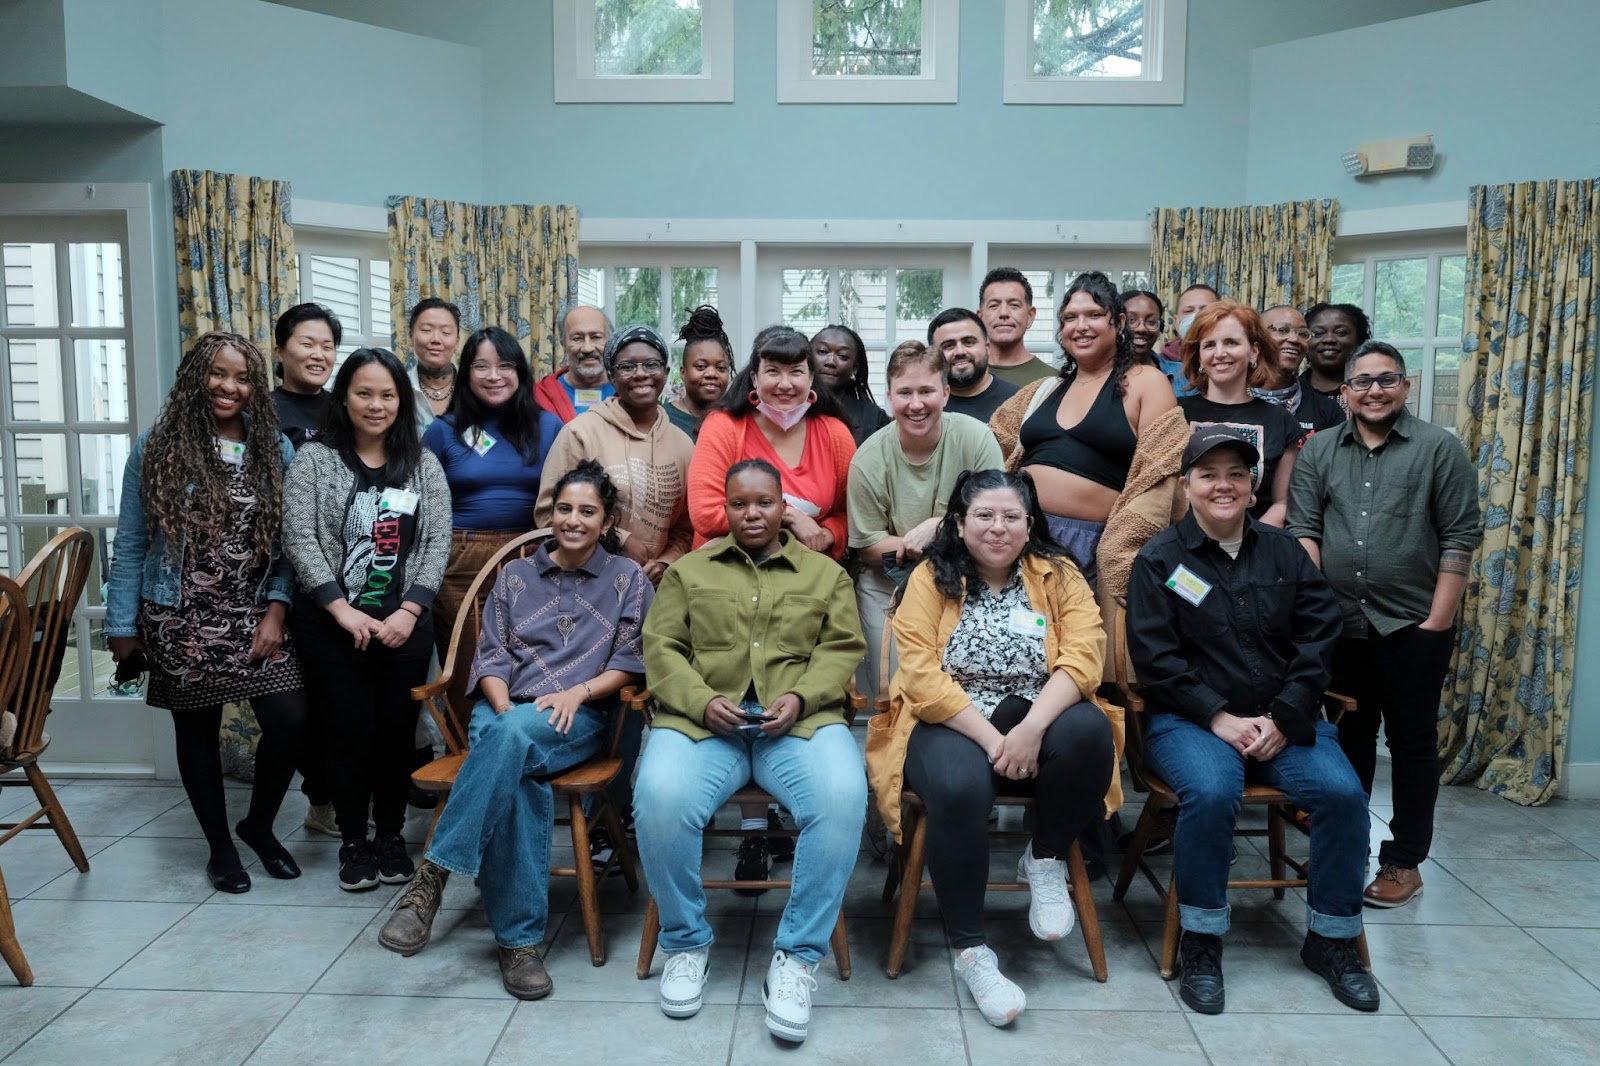 The MediaJustice NEtwork Fellows, Alumni, Mentors, and Staff smile at the camera in a group photo